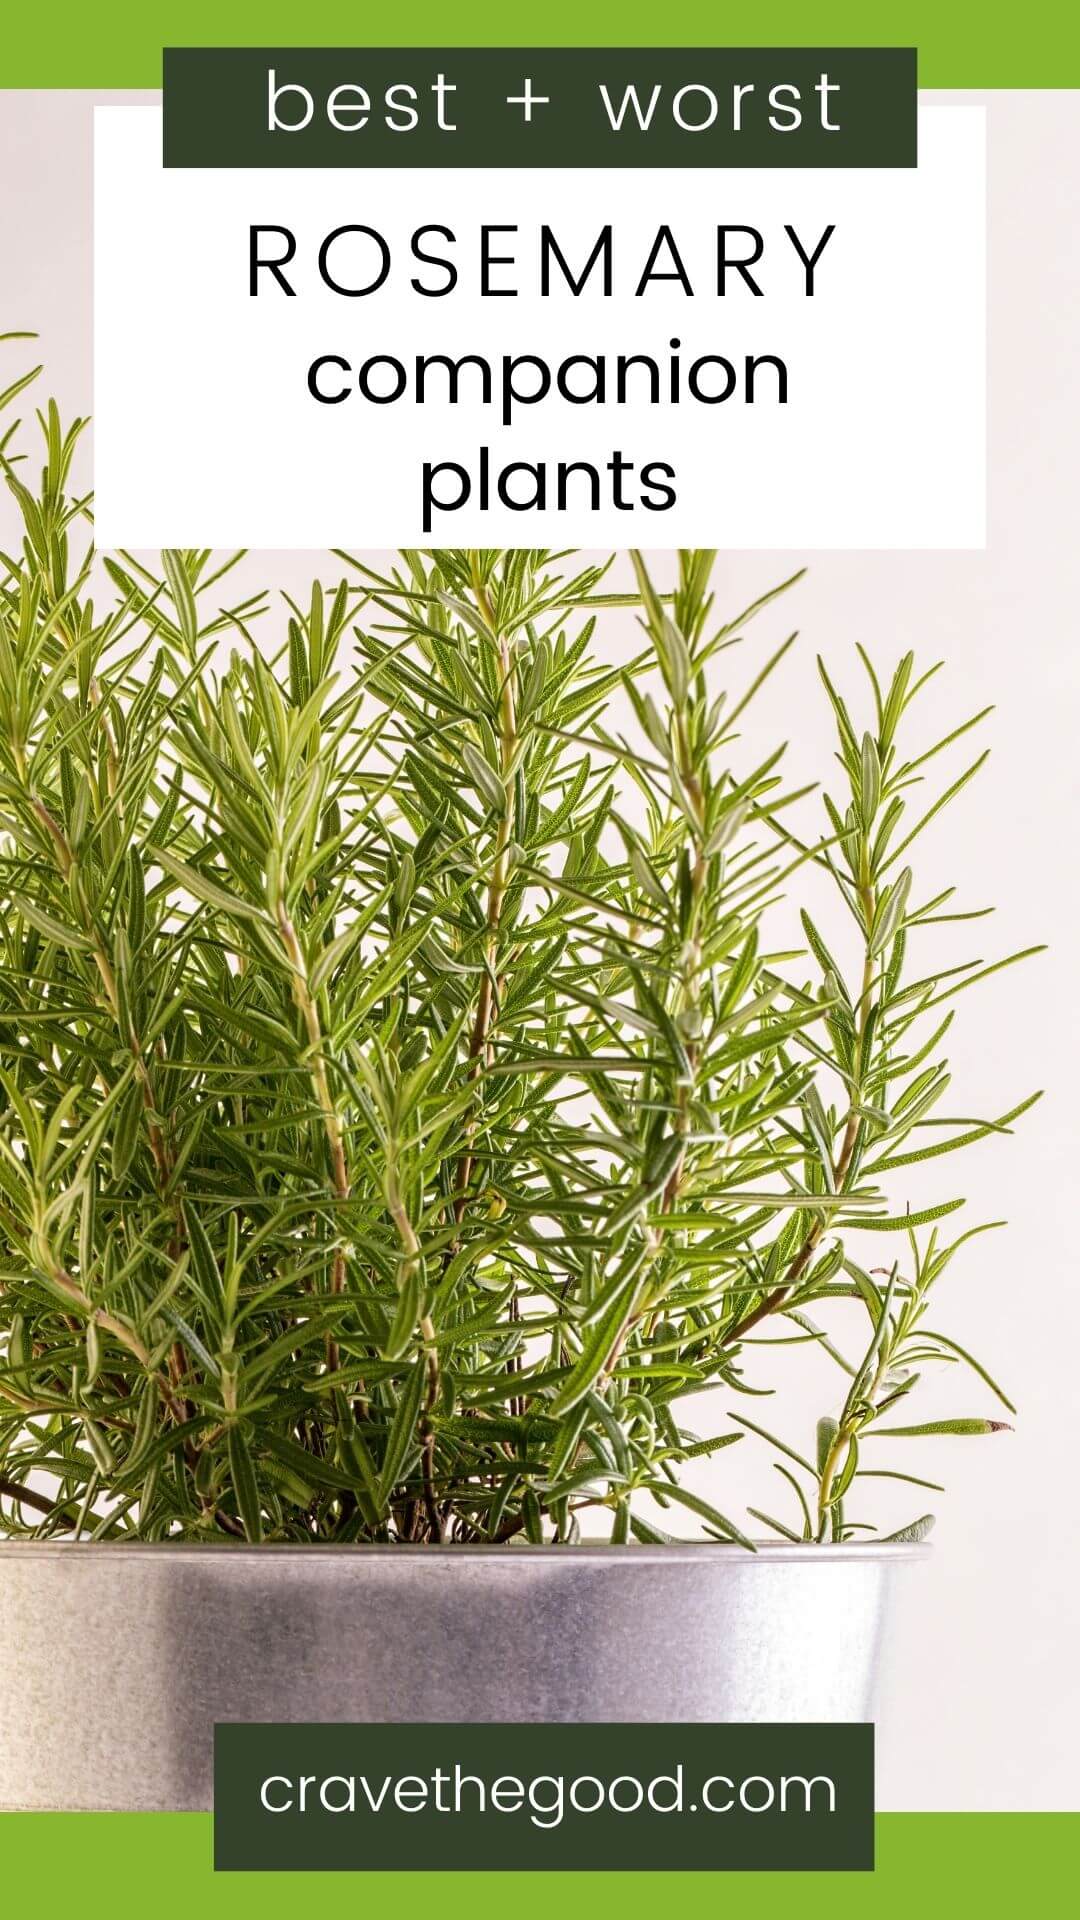 Best and worst rosemary companion plants pinterest graphic. 